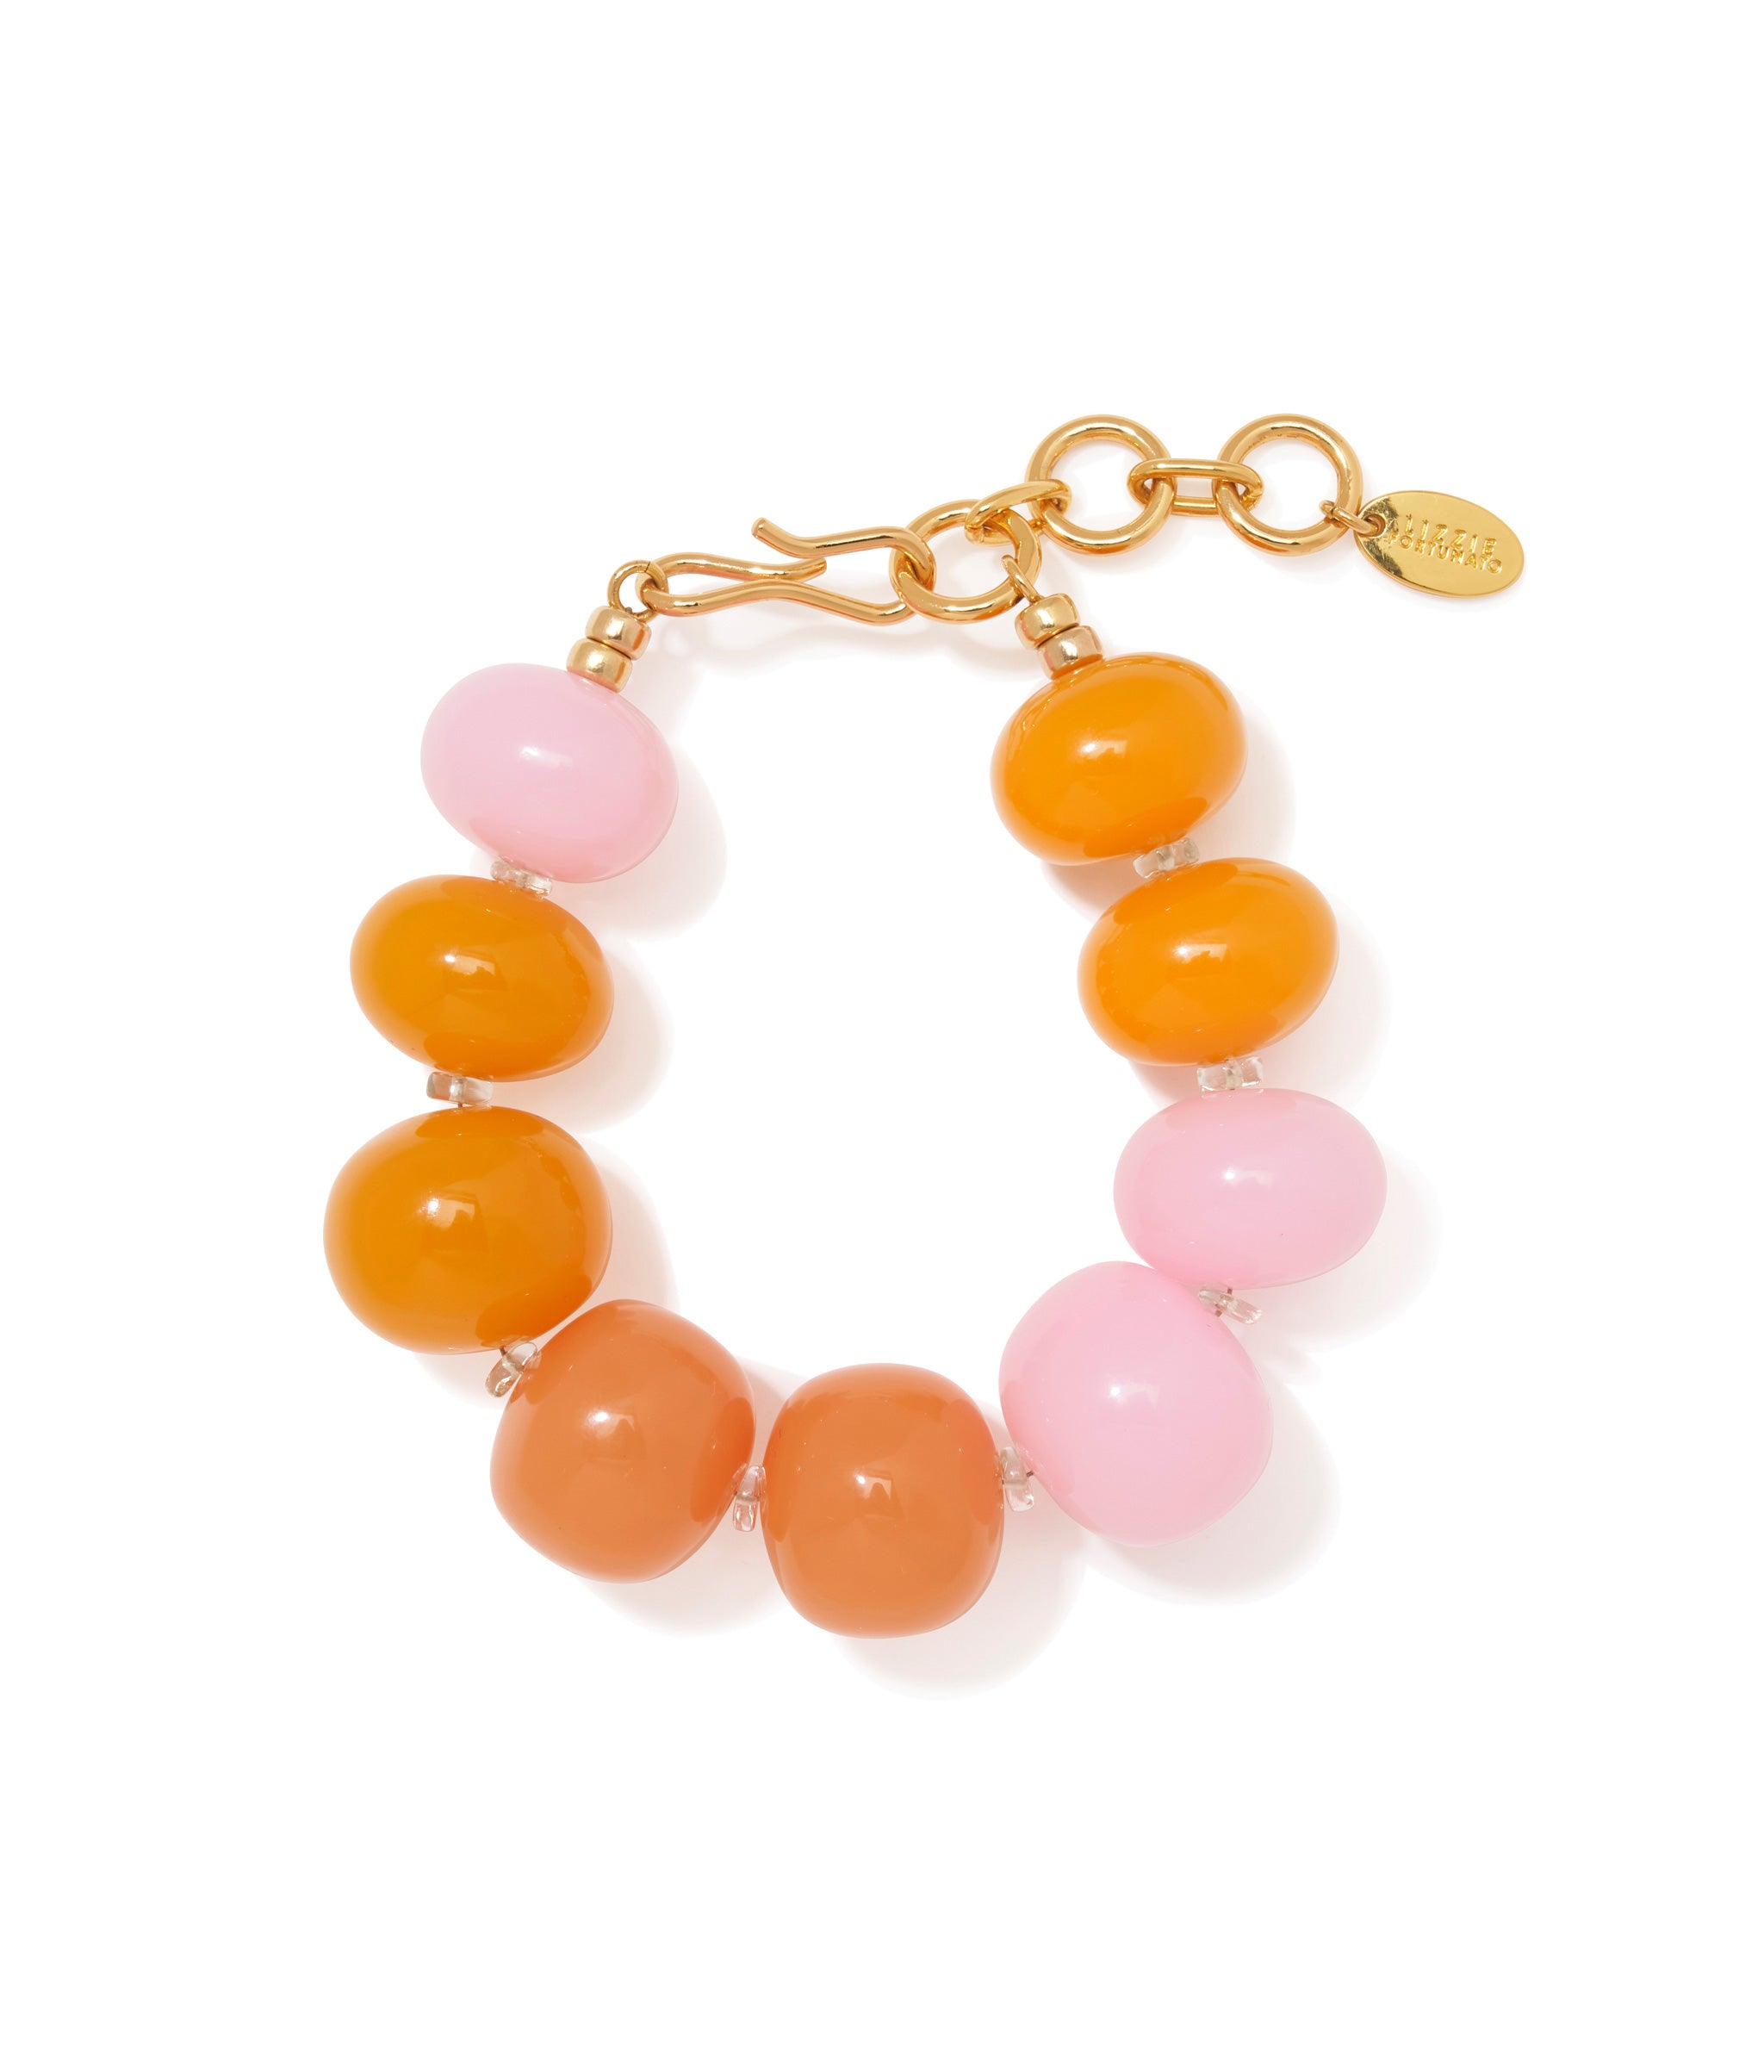 Olympia Bracelet. Bracelet with orange-pink various resin beads with opal accent beads and gold-placed brass hook closure.